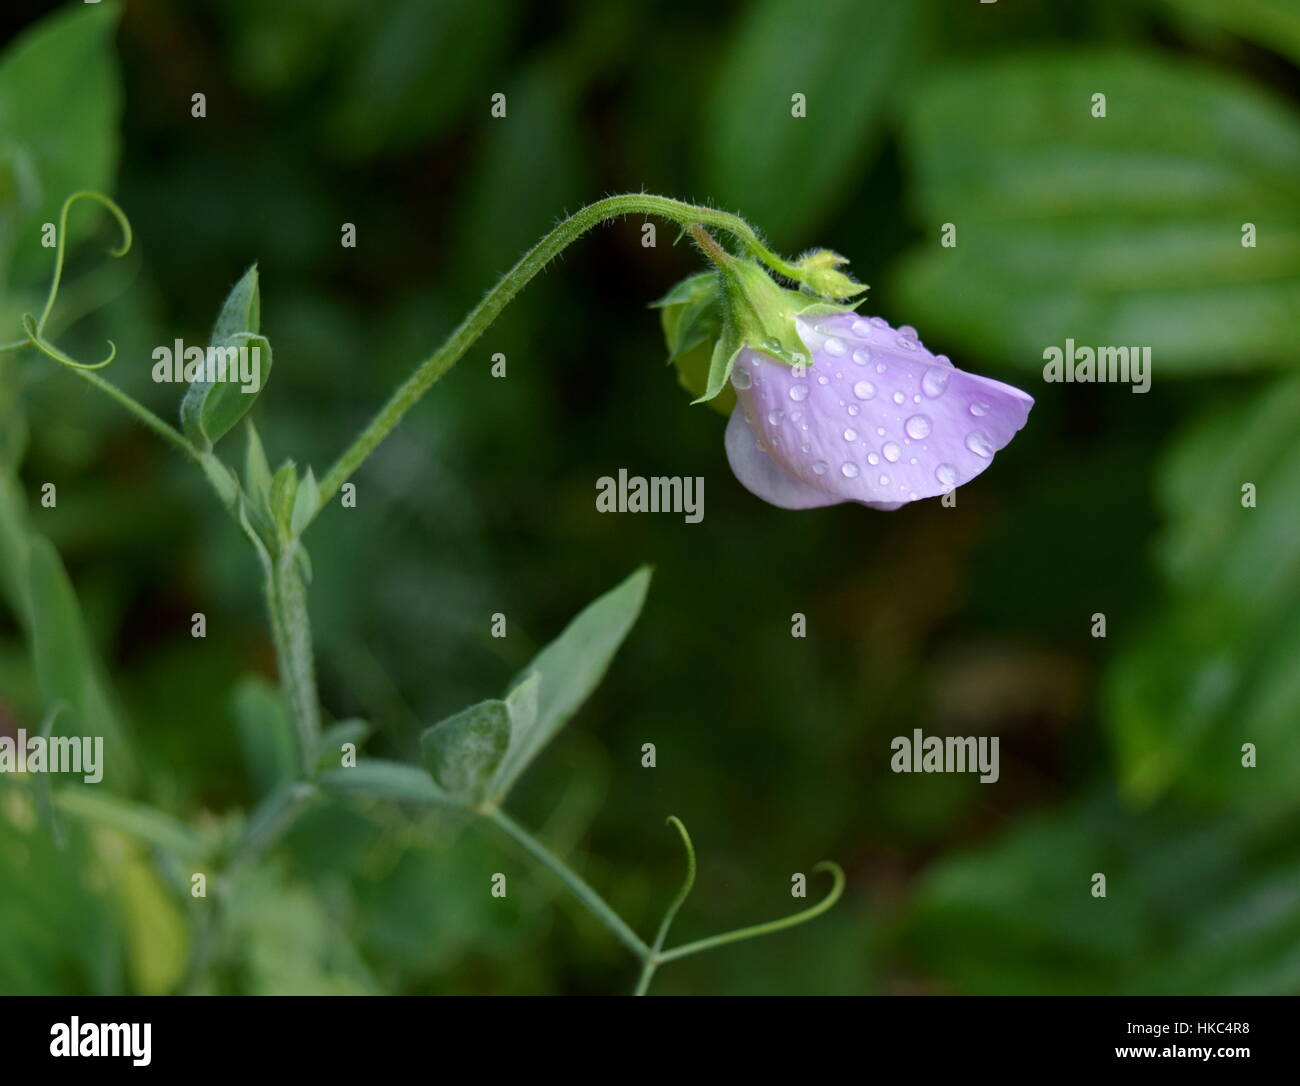 Single  pale lilac colored sweet-pea flower with raindrops on petal bloom, leaves and greenery in background Stock Photo